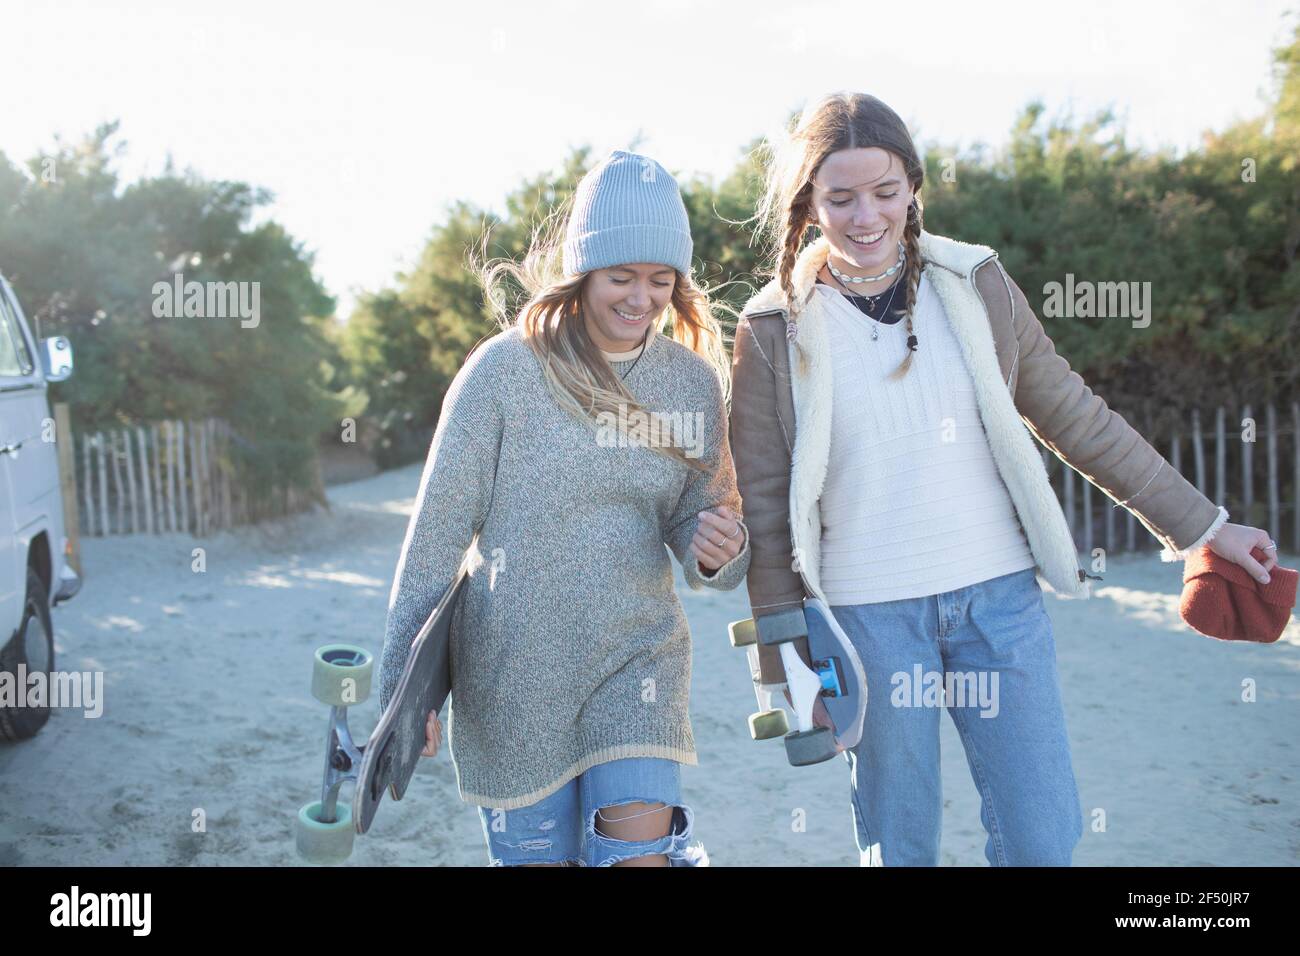 Happy young women friends with skateboards on sunny beach path Stock Photo